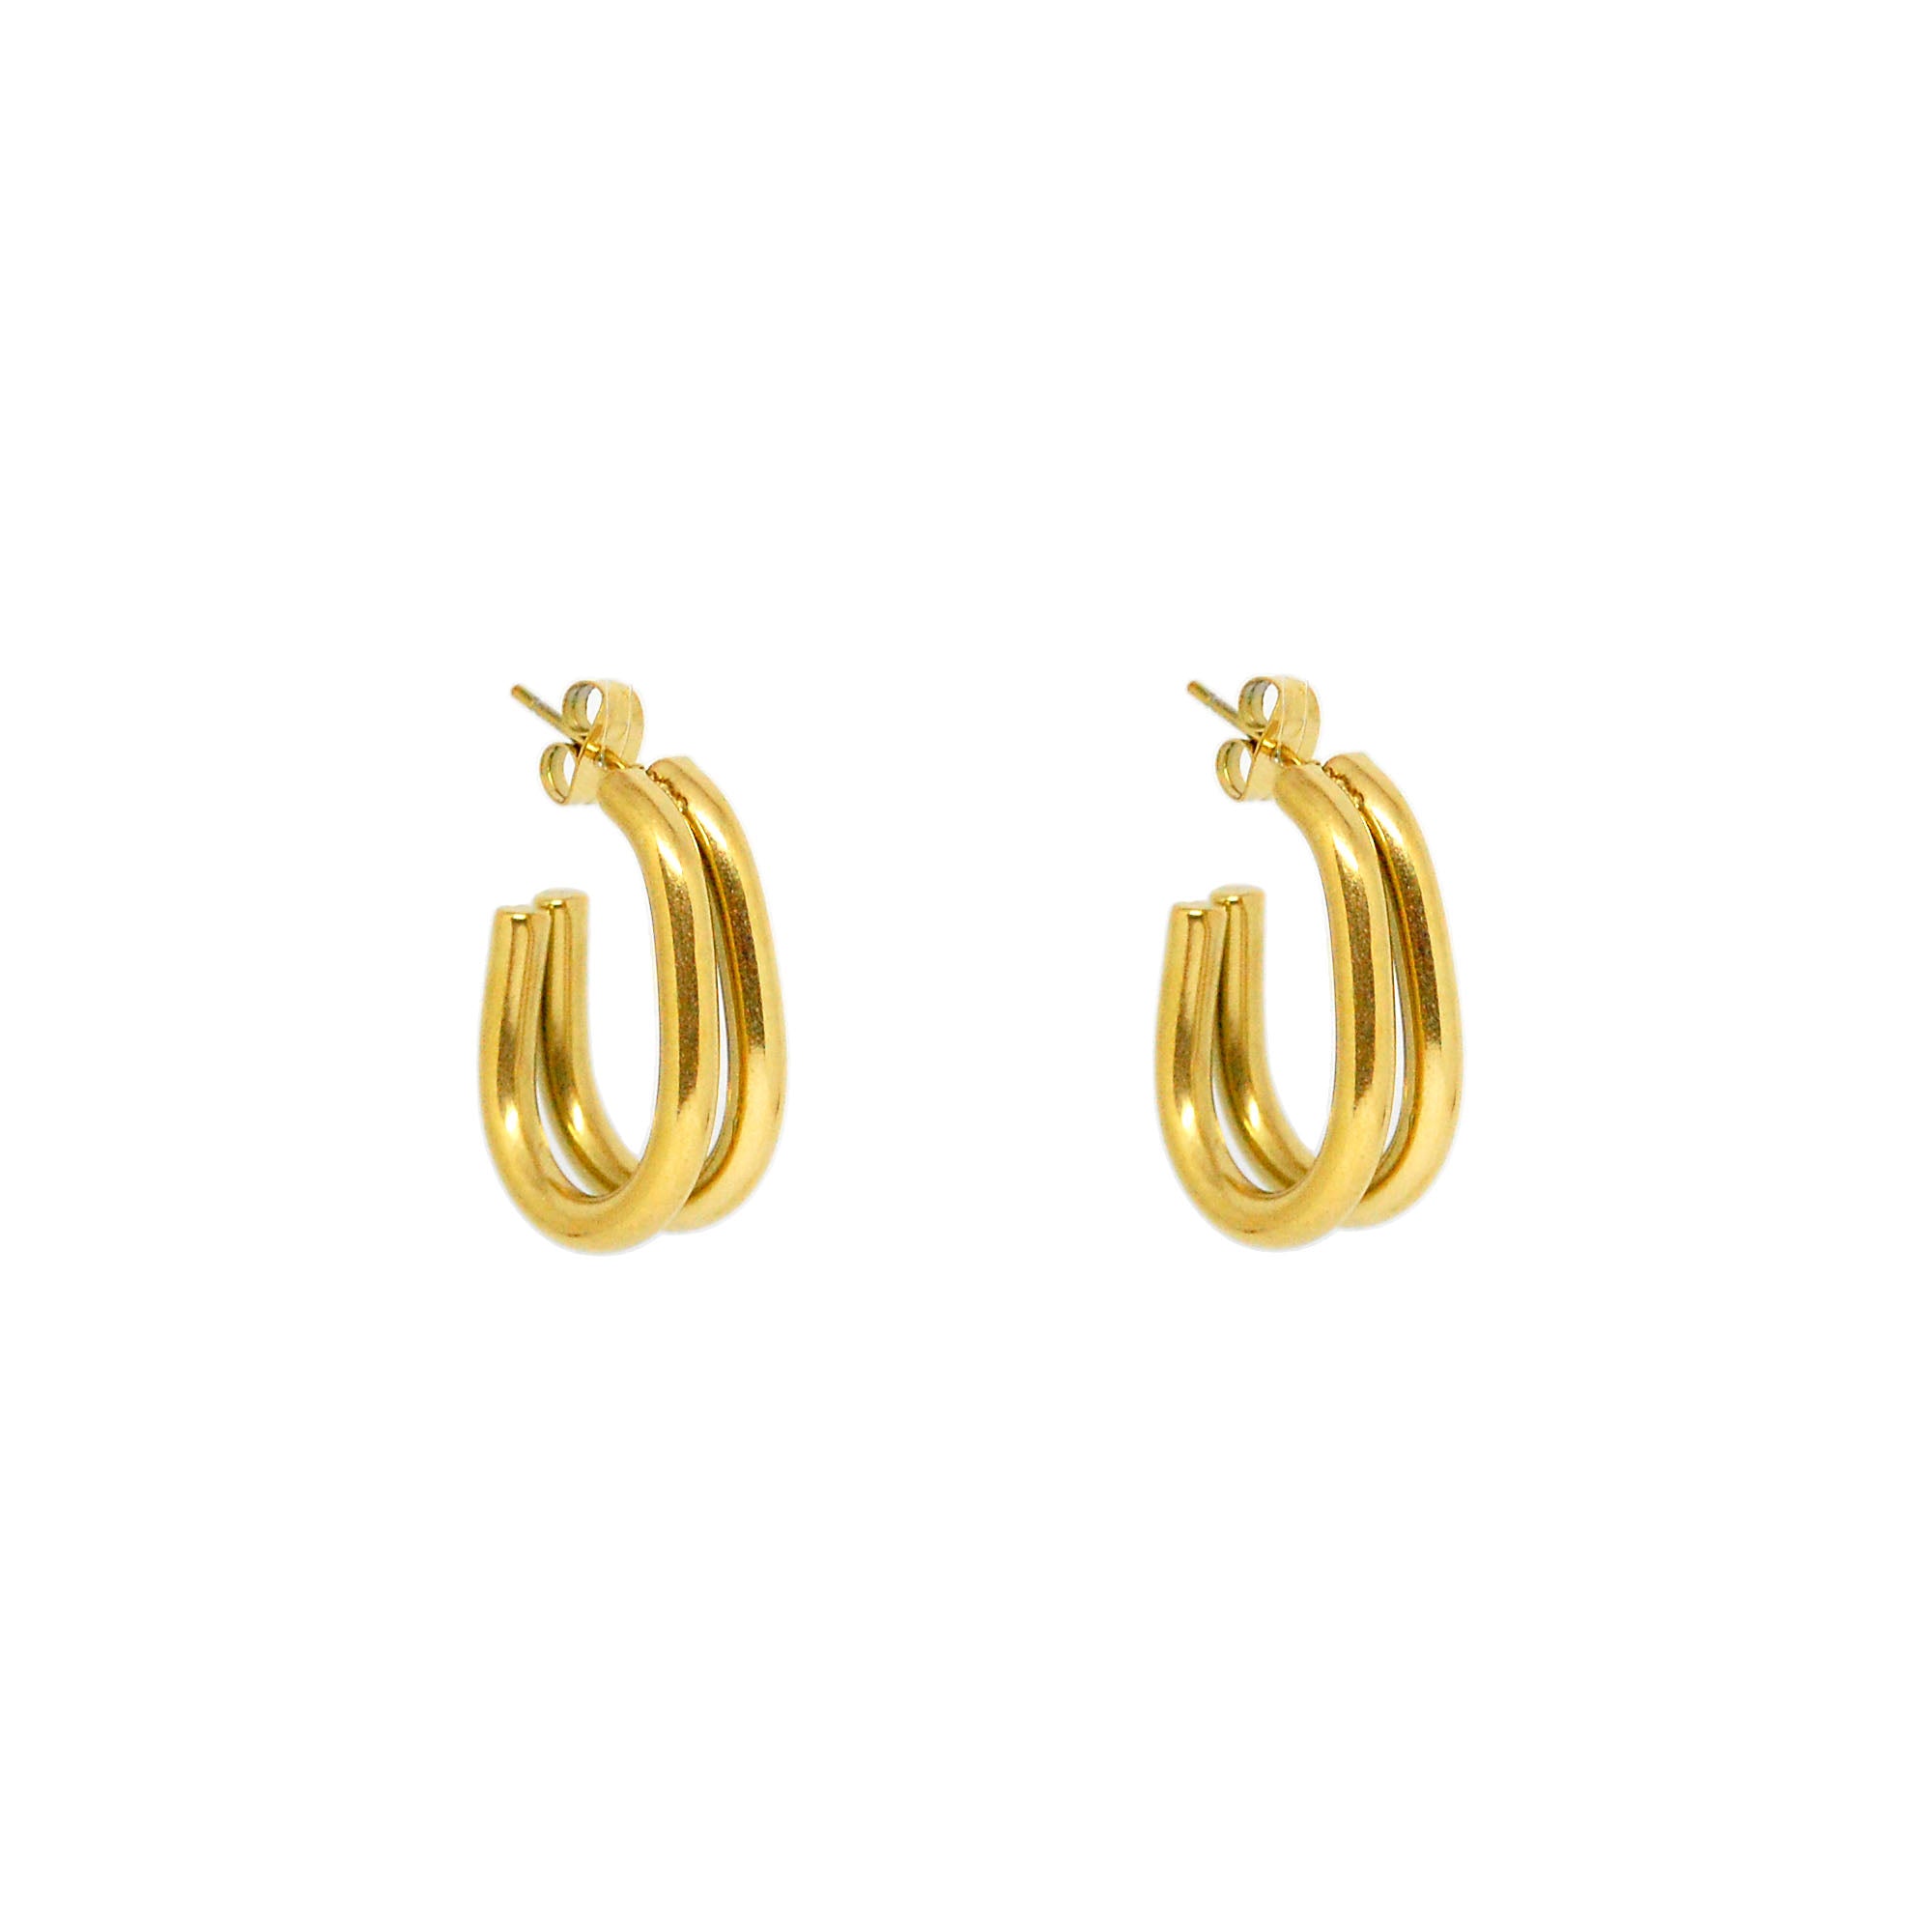 ESE 7704: Gold Plated Elongated 2-Lined Hook Earrings